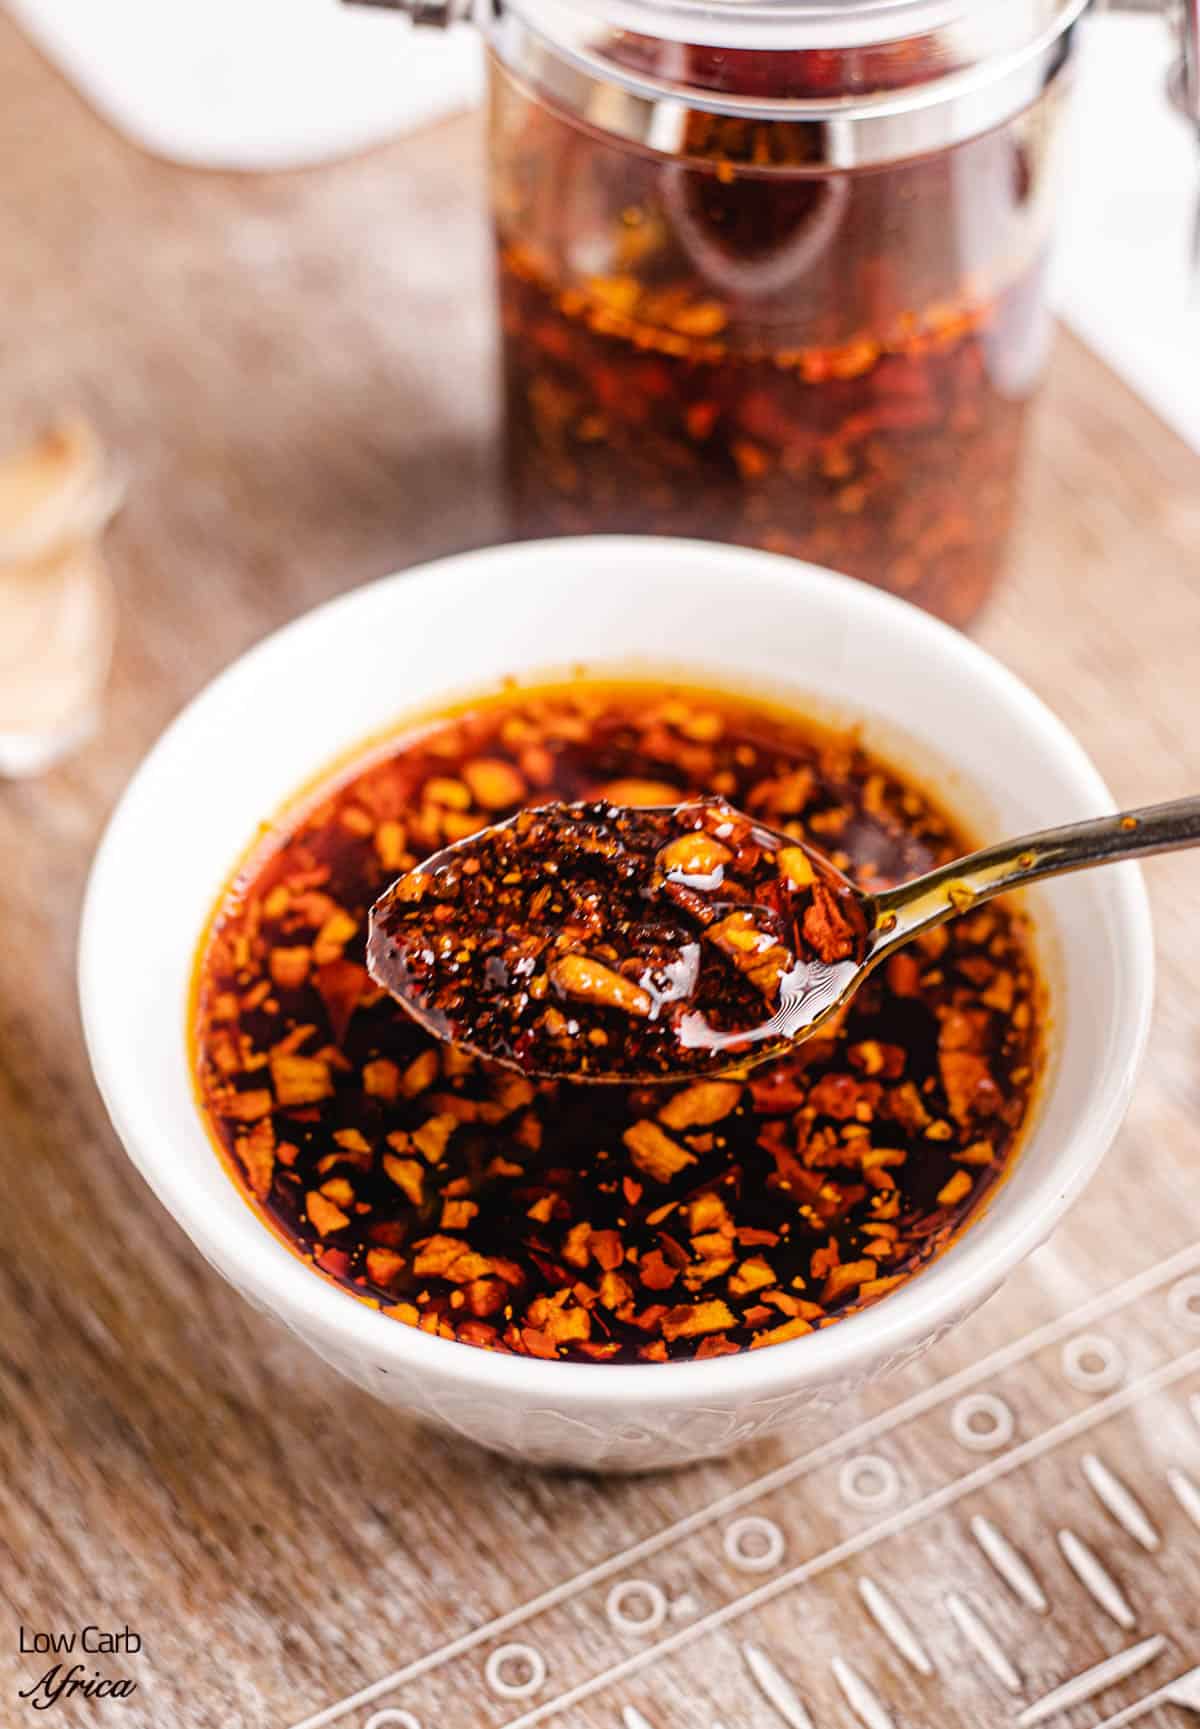 a spoon scooping up some garlic chili oil